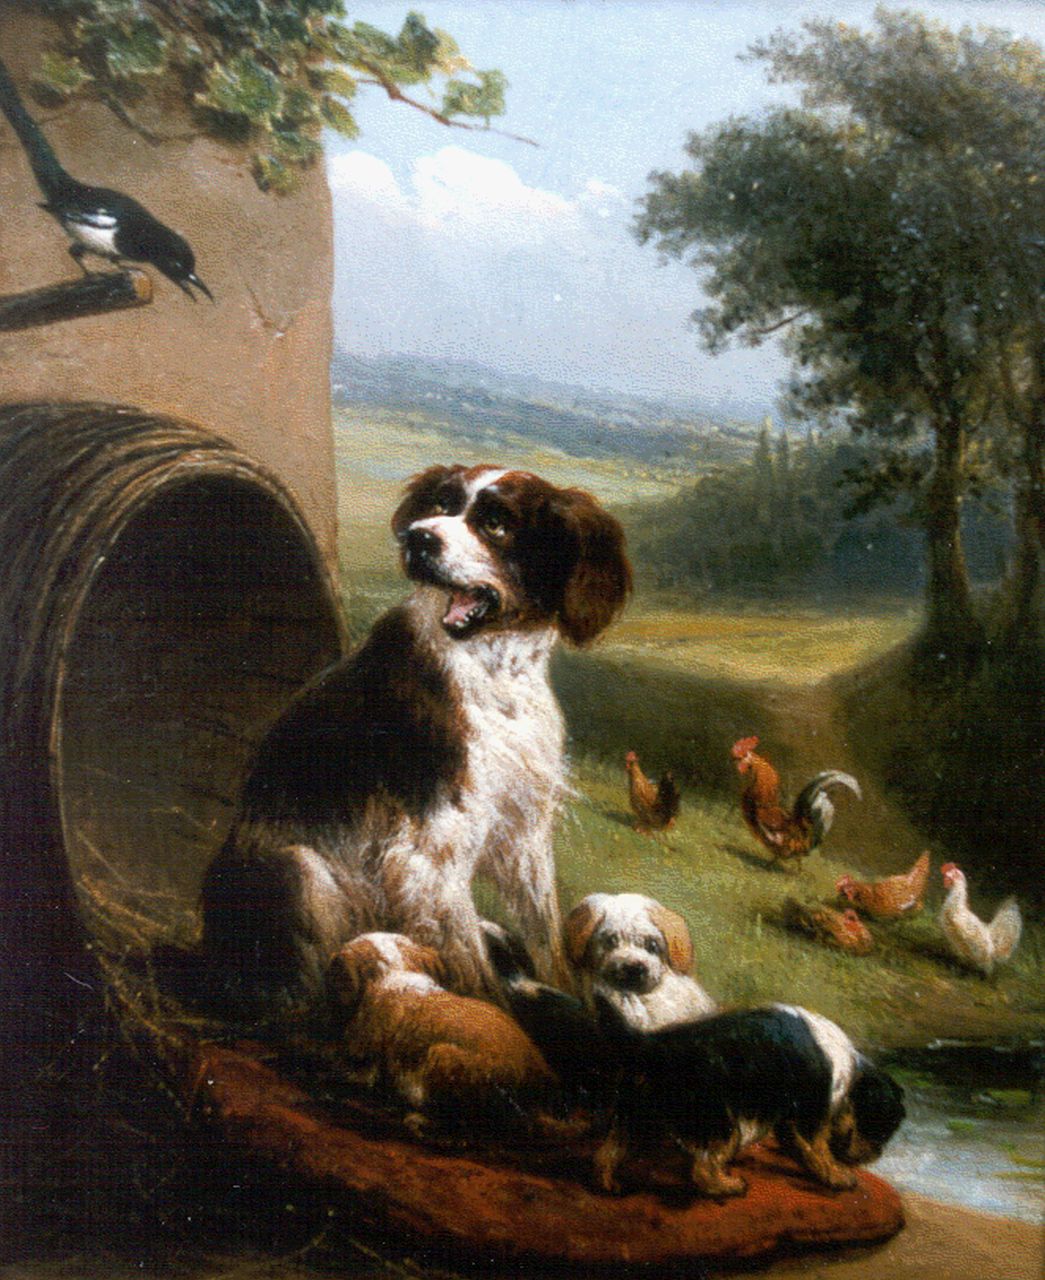 Ronner-Knip H.  | Henriette Ronner-Knip, A dog with puppies, Öl auf Holz 17,0 x 13,7 cm, signed l.r.